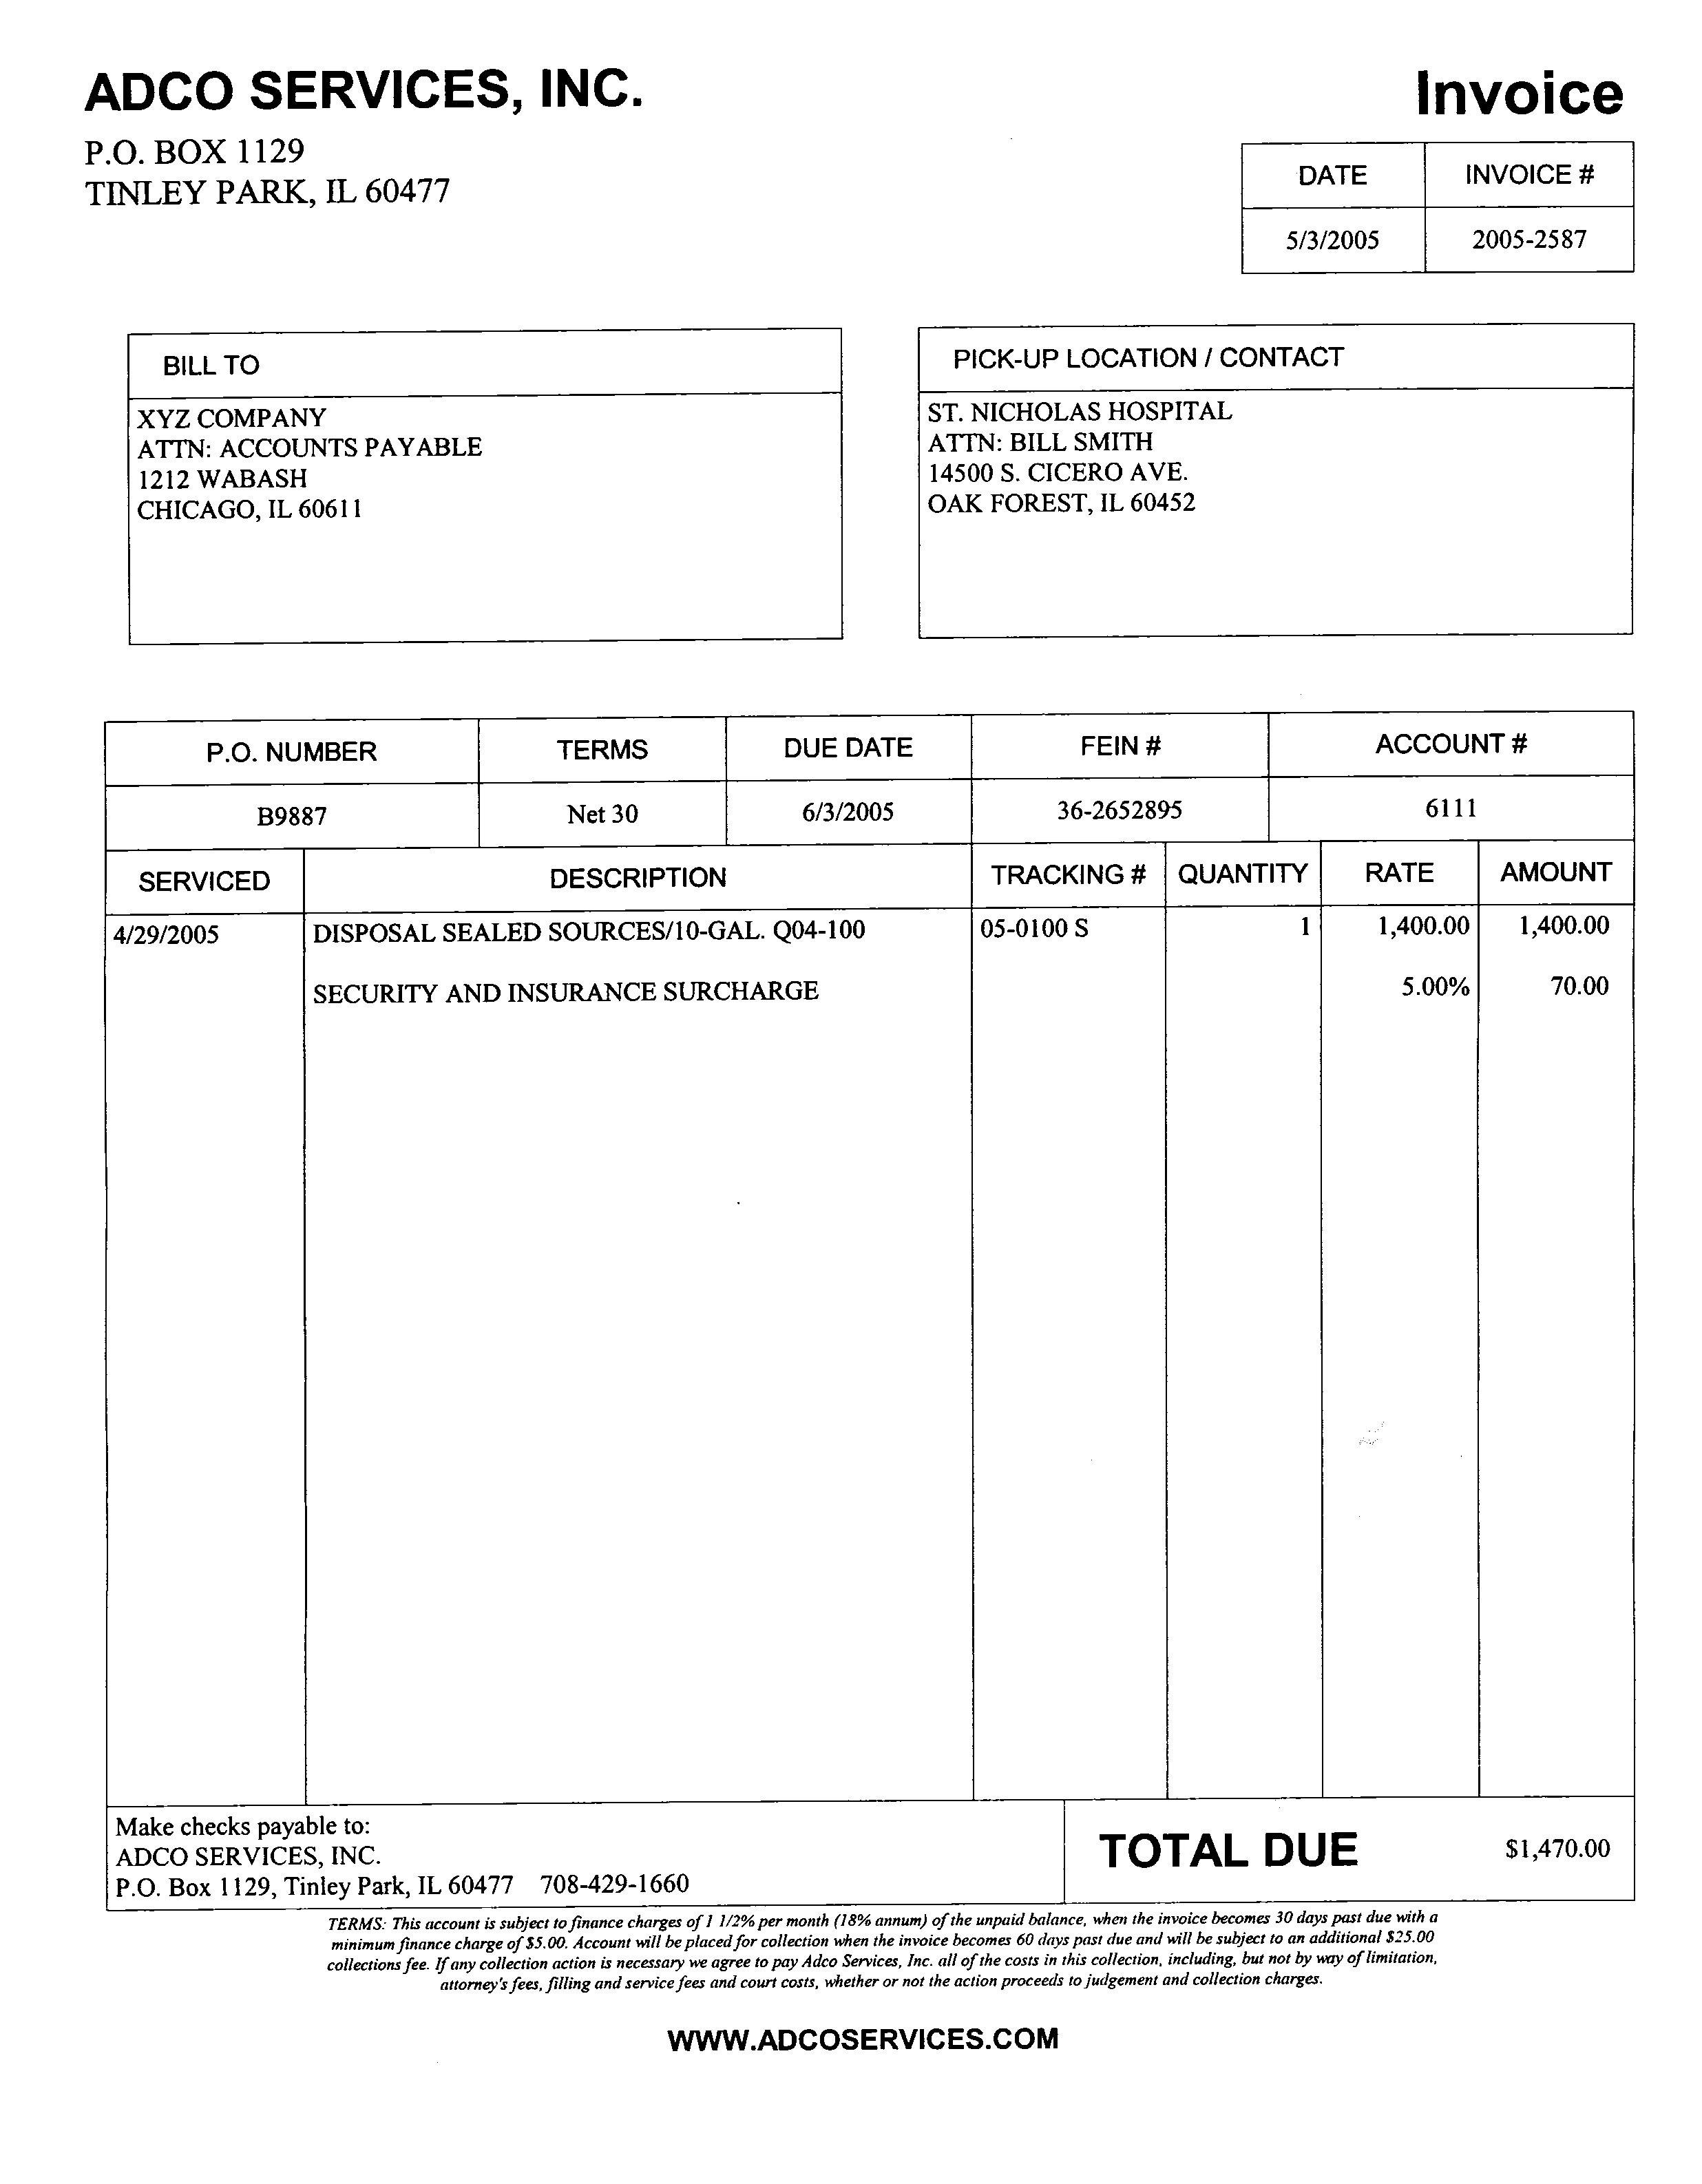 new page 1 invoice terms net 30